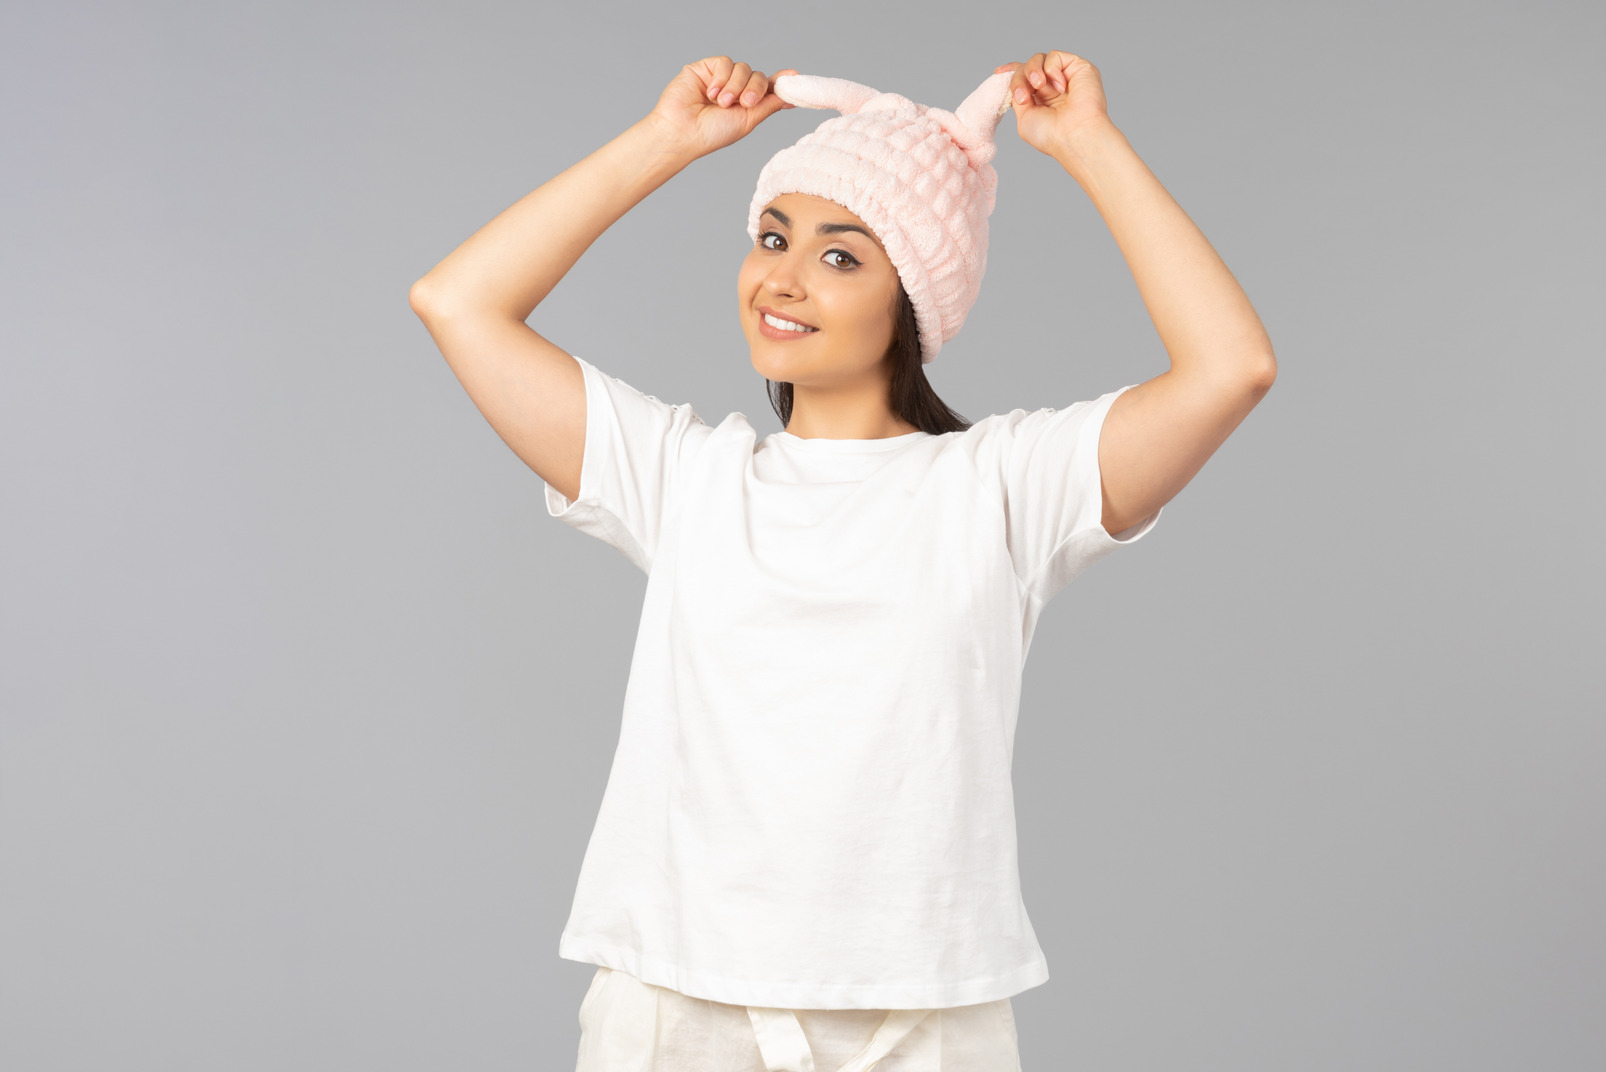 Young indian woman in home clothes touching pink rabbit like hat she's wearing